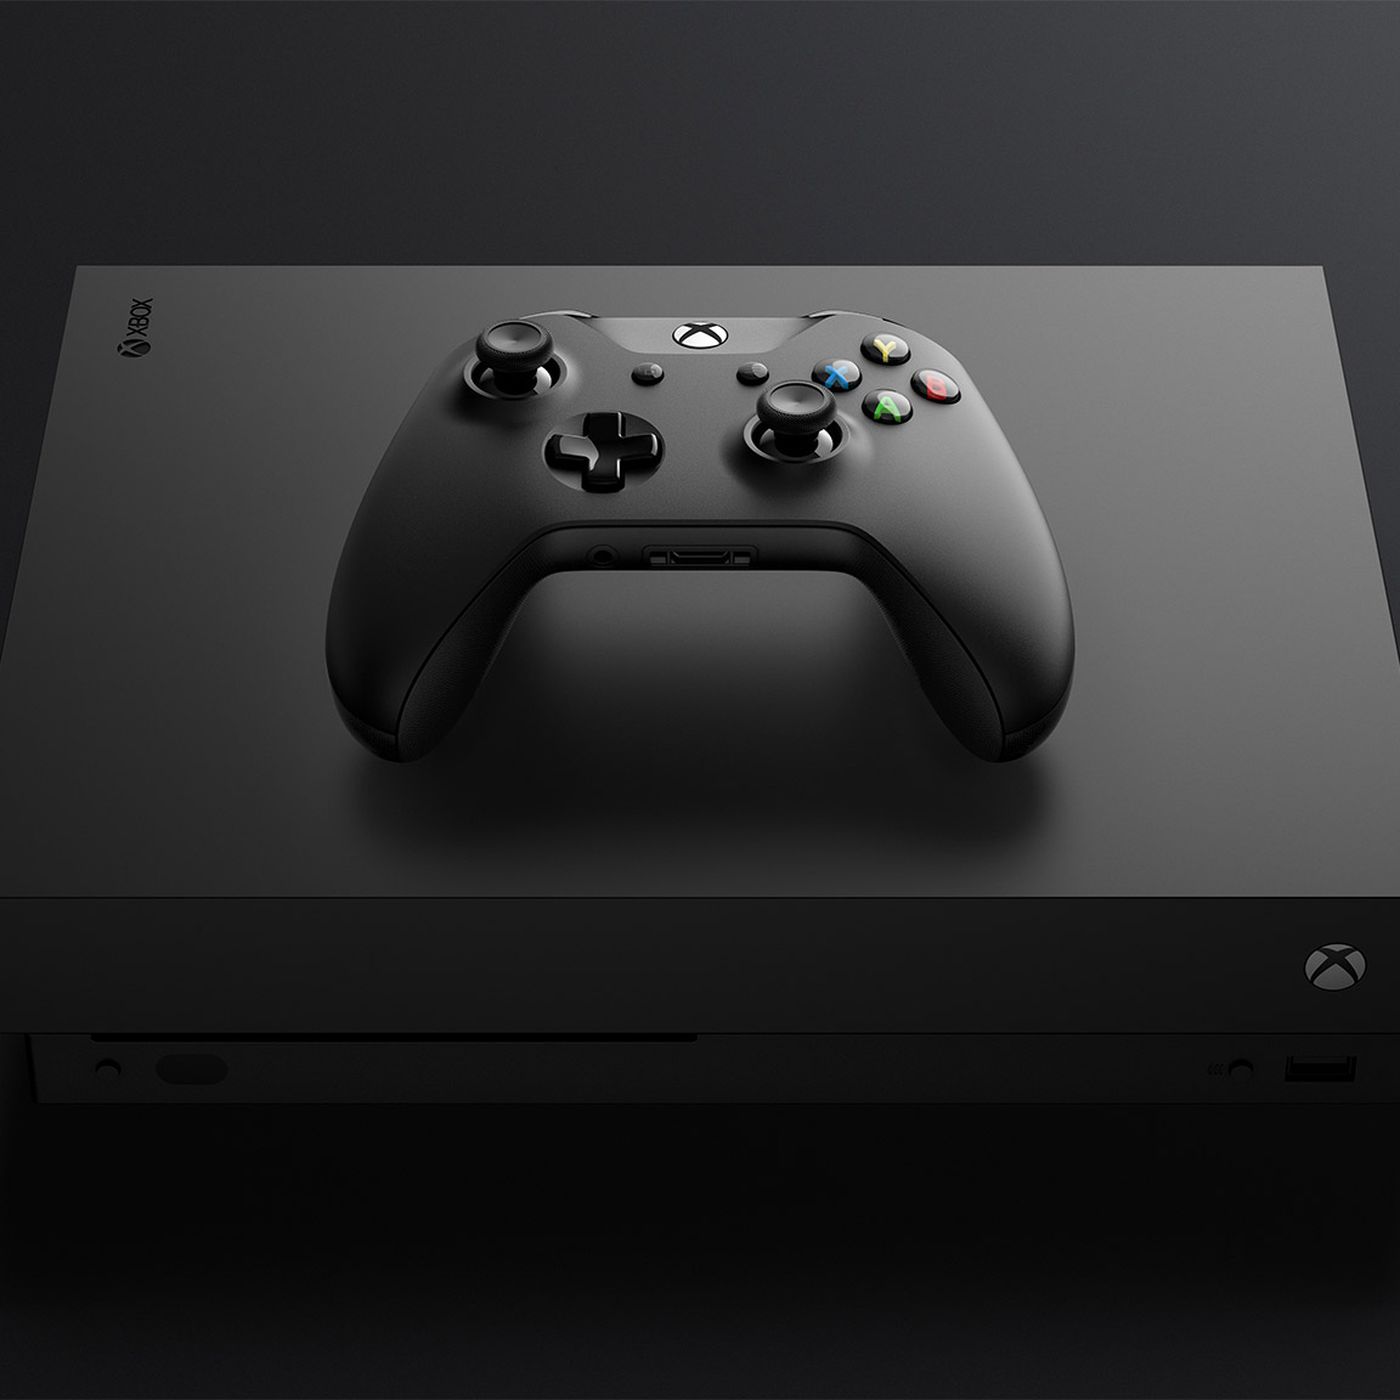 boog het winkelcentrum hoogtepunt Is the Xbox One X worth it without a 4K TV? - Polygon